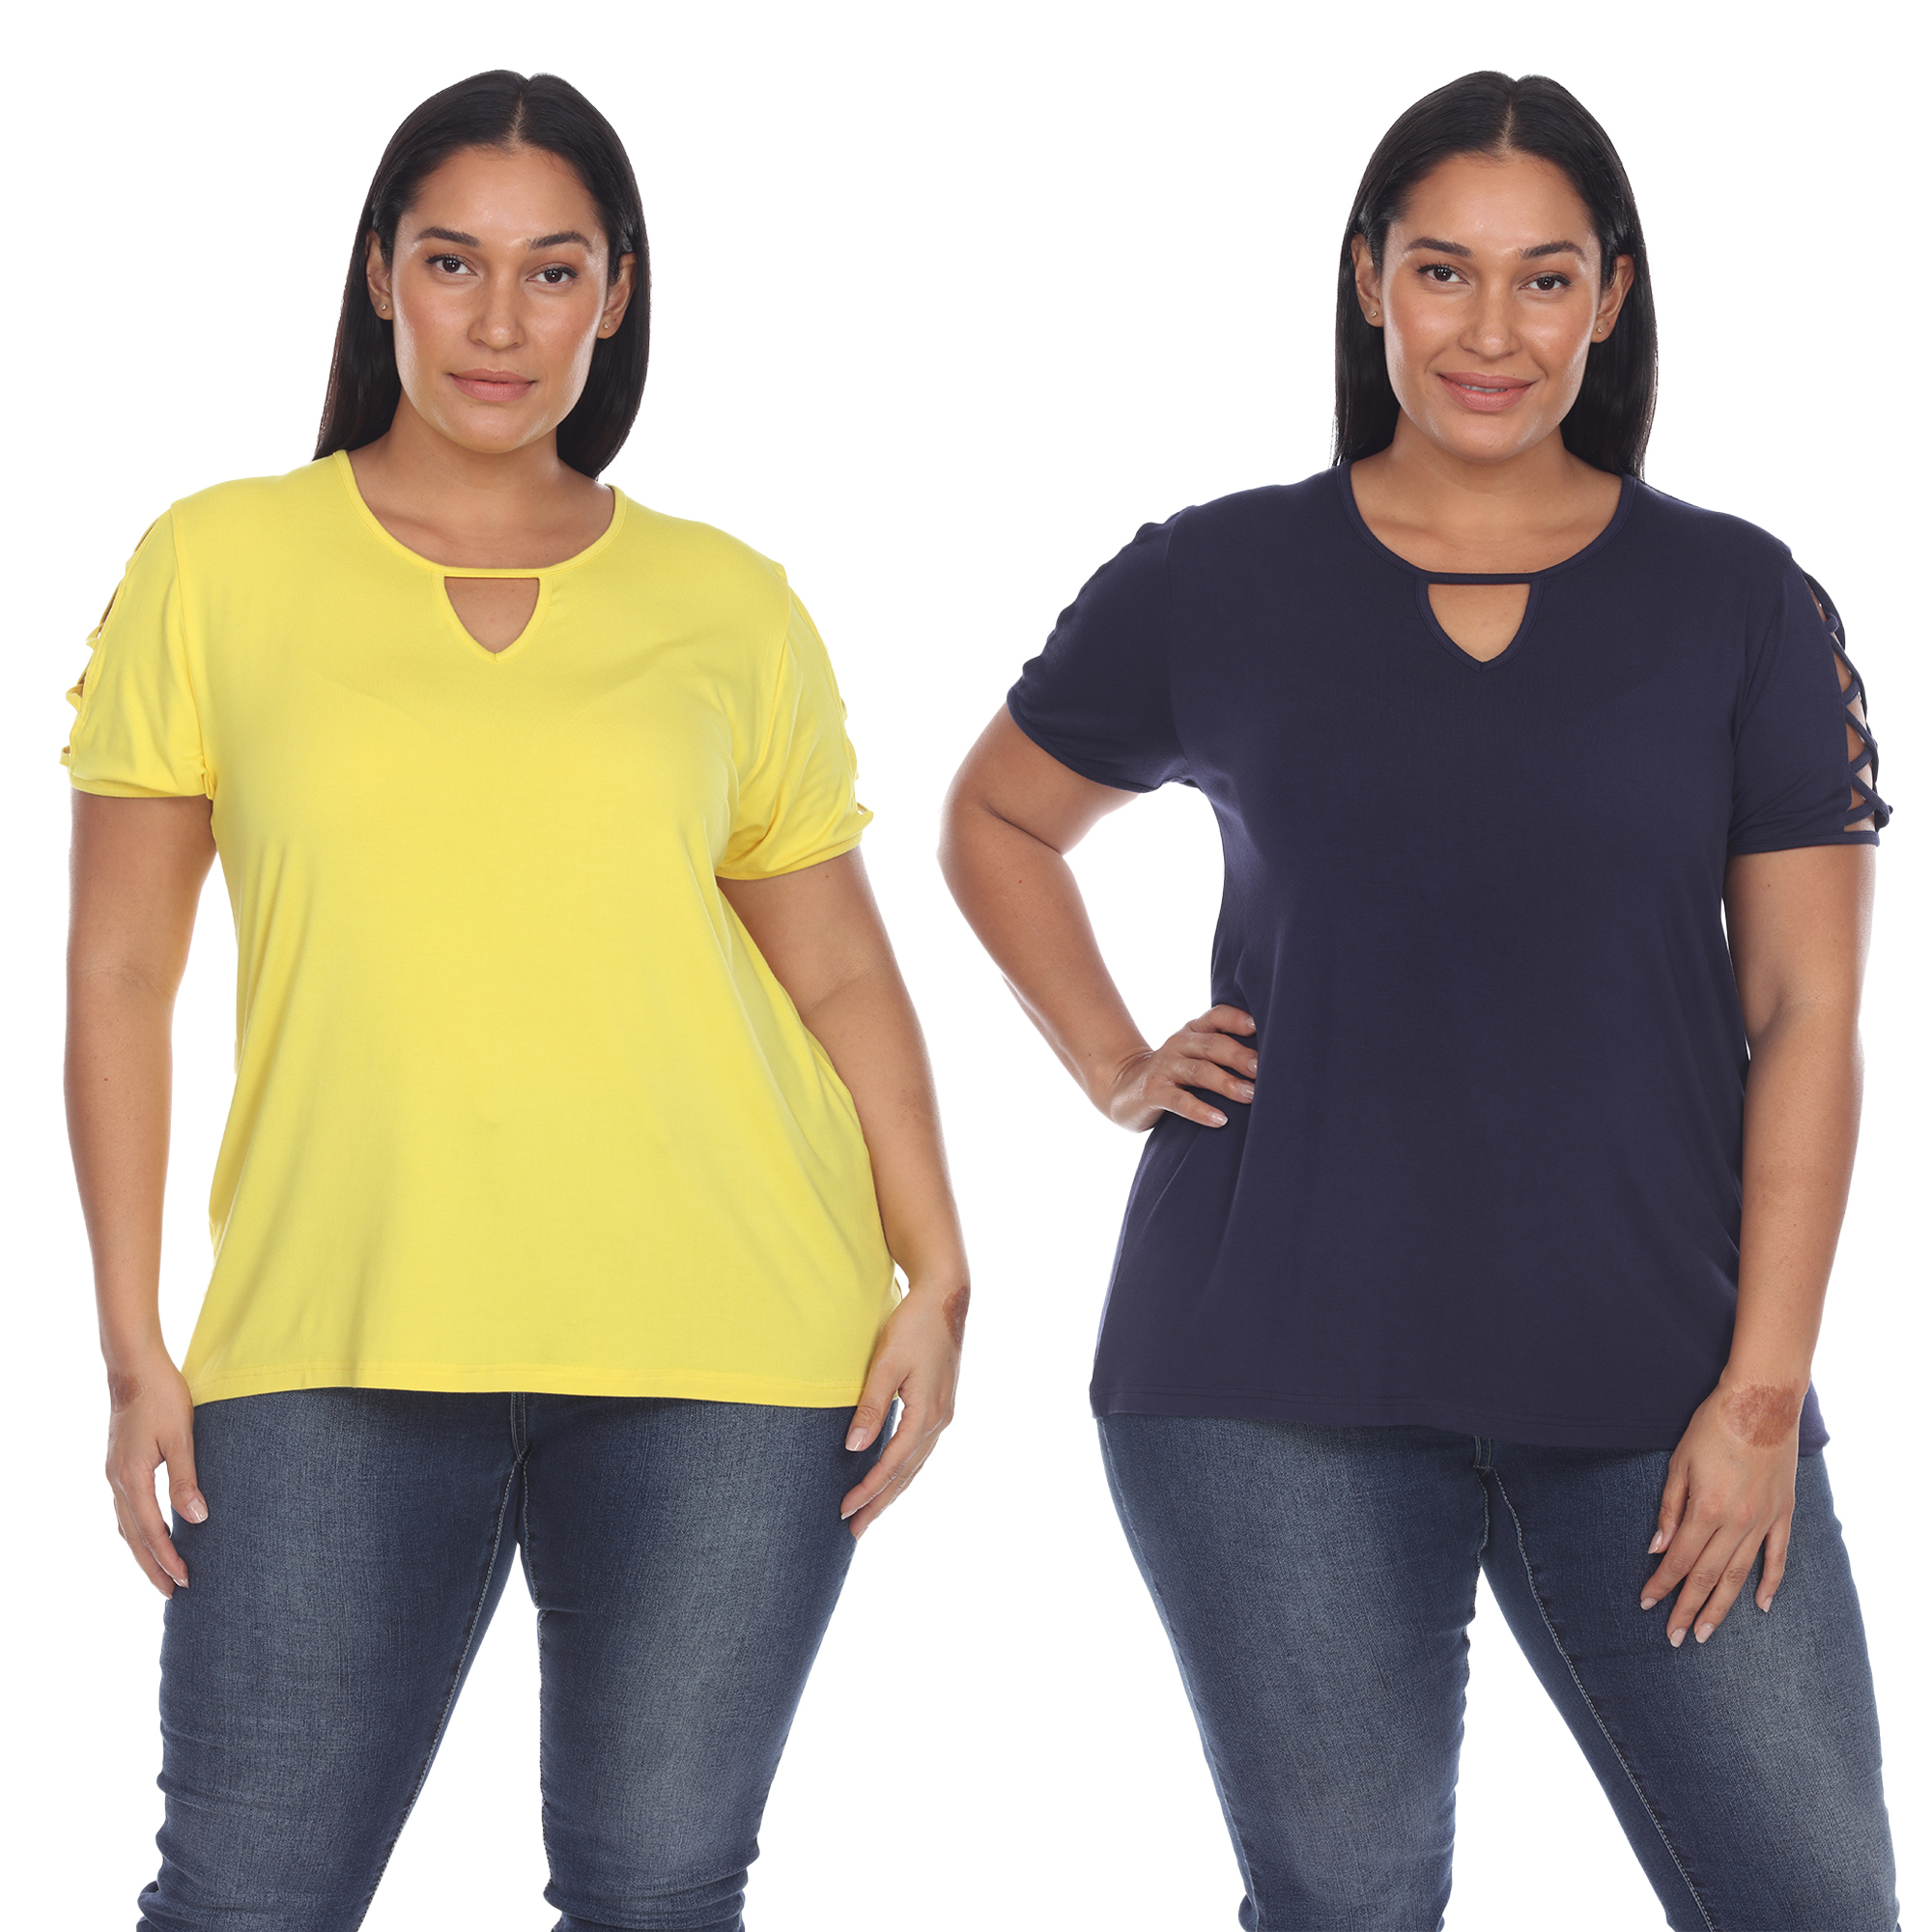 White Mark Women's Pack Of 2 Yellow Keyhole Neck Short Sleeve Top - Yellow Rose, 3X